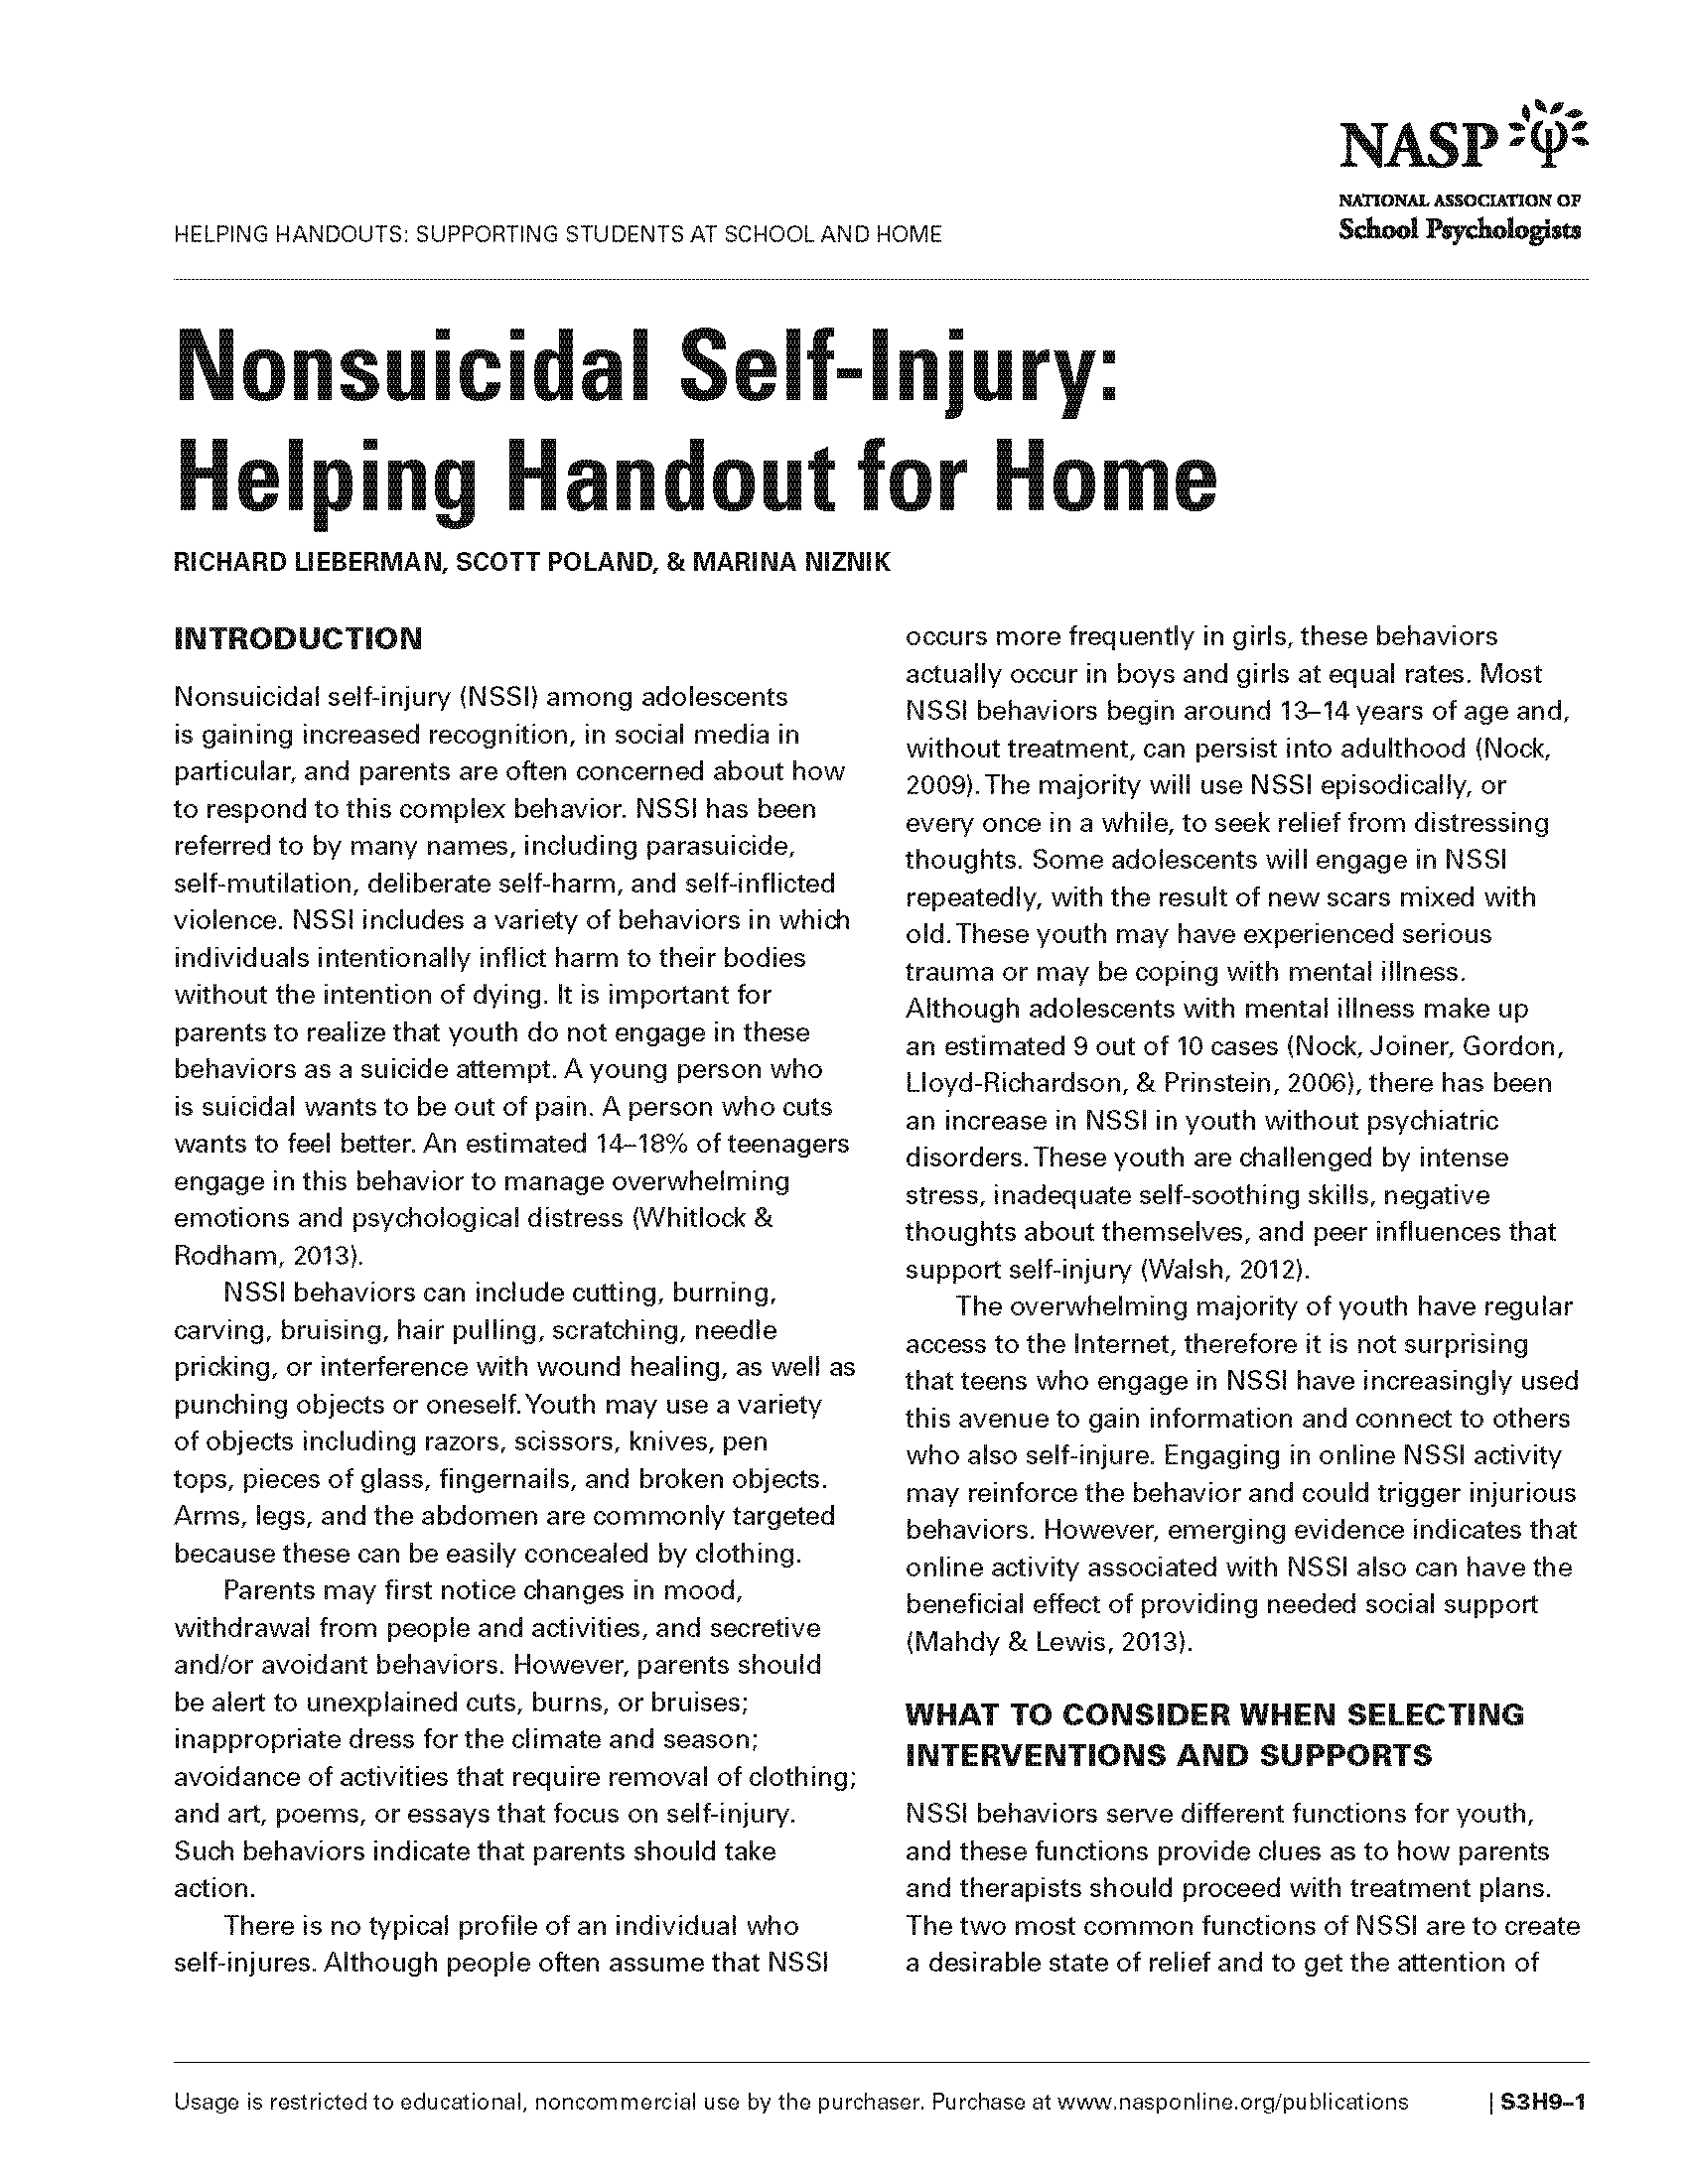 Nonsuicidal Self-Injury: Helping Handout for Home